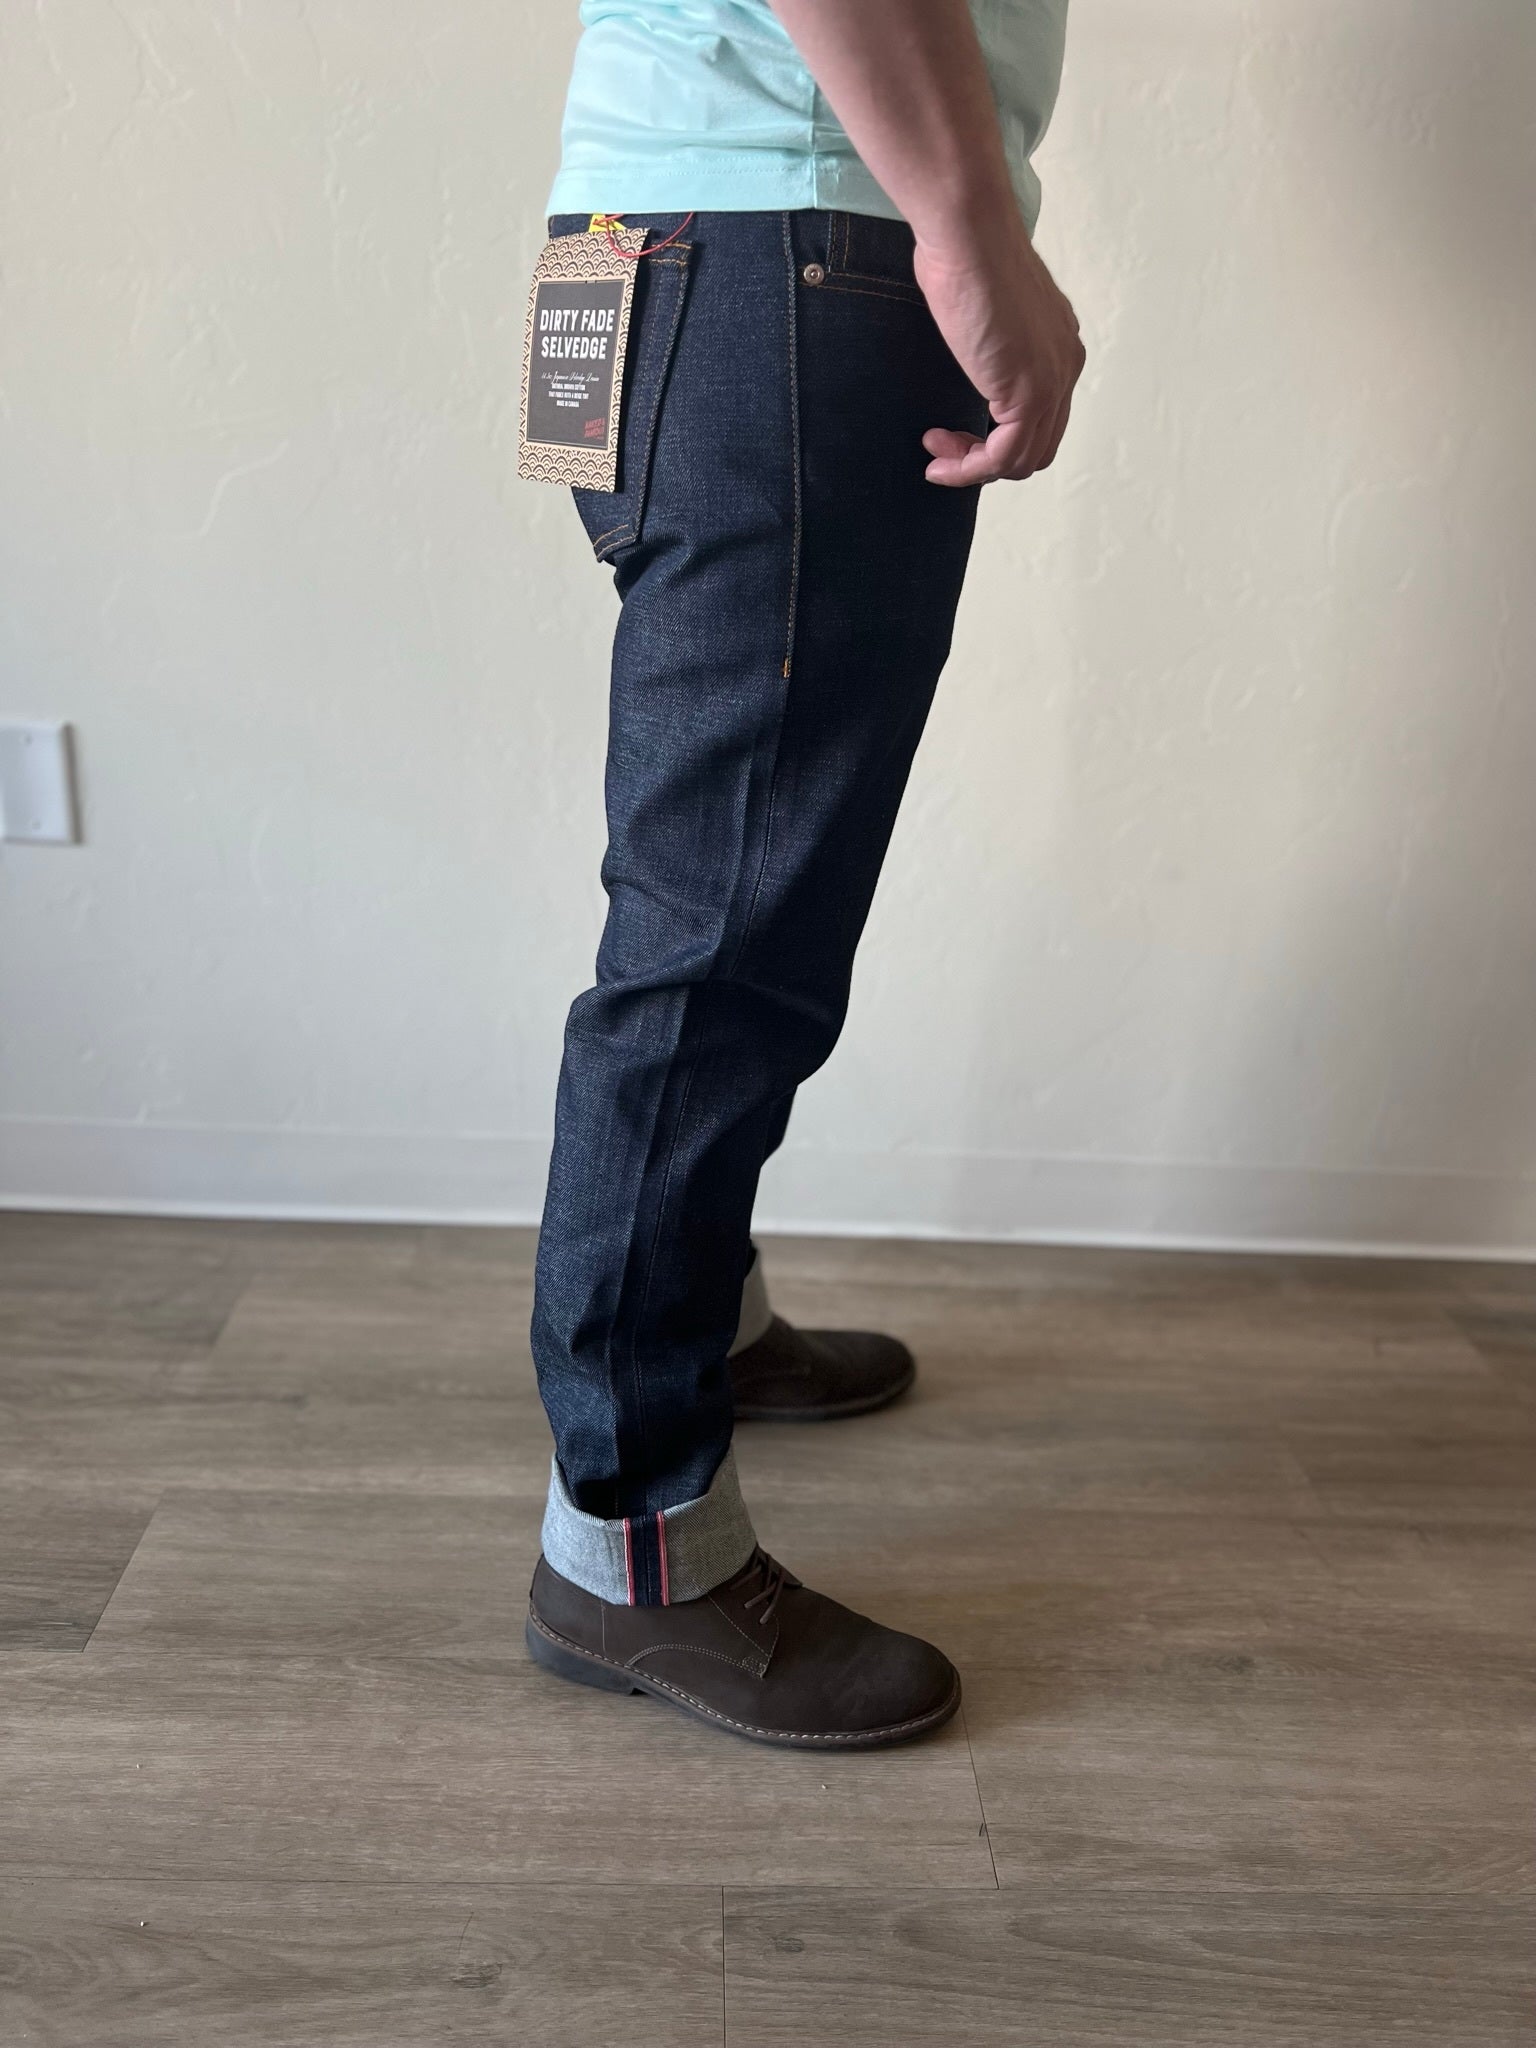 Fit check on sale item (non refundable) : r/rawdenim